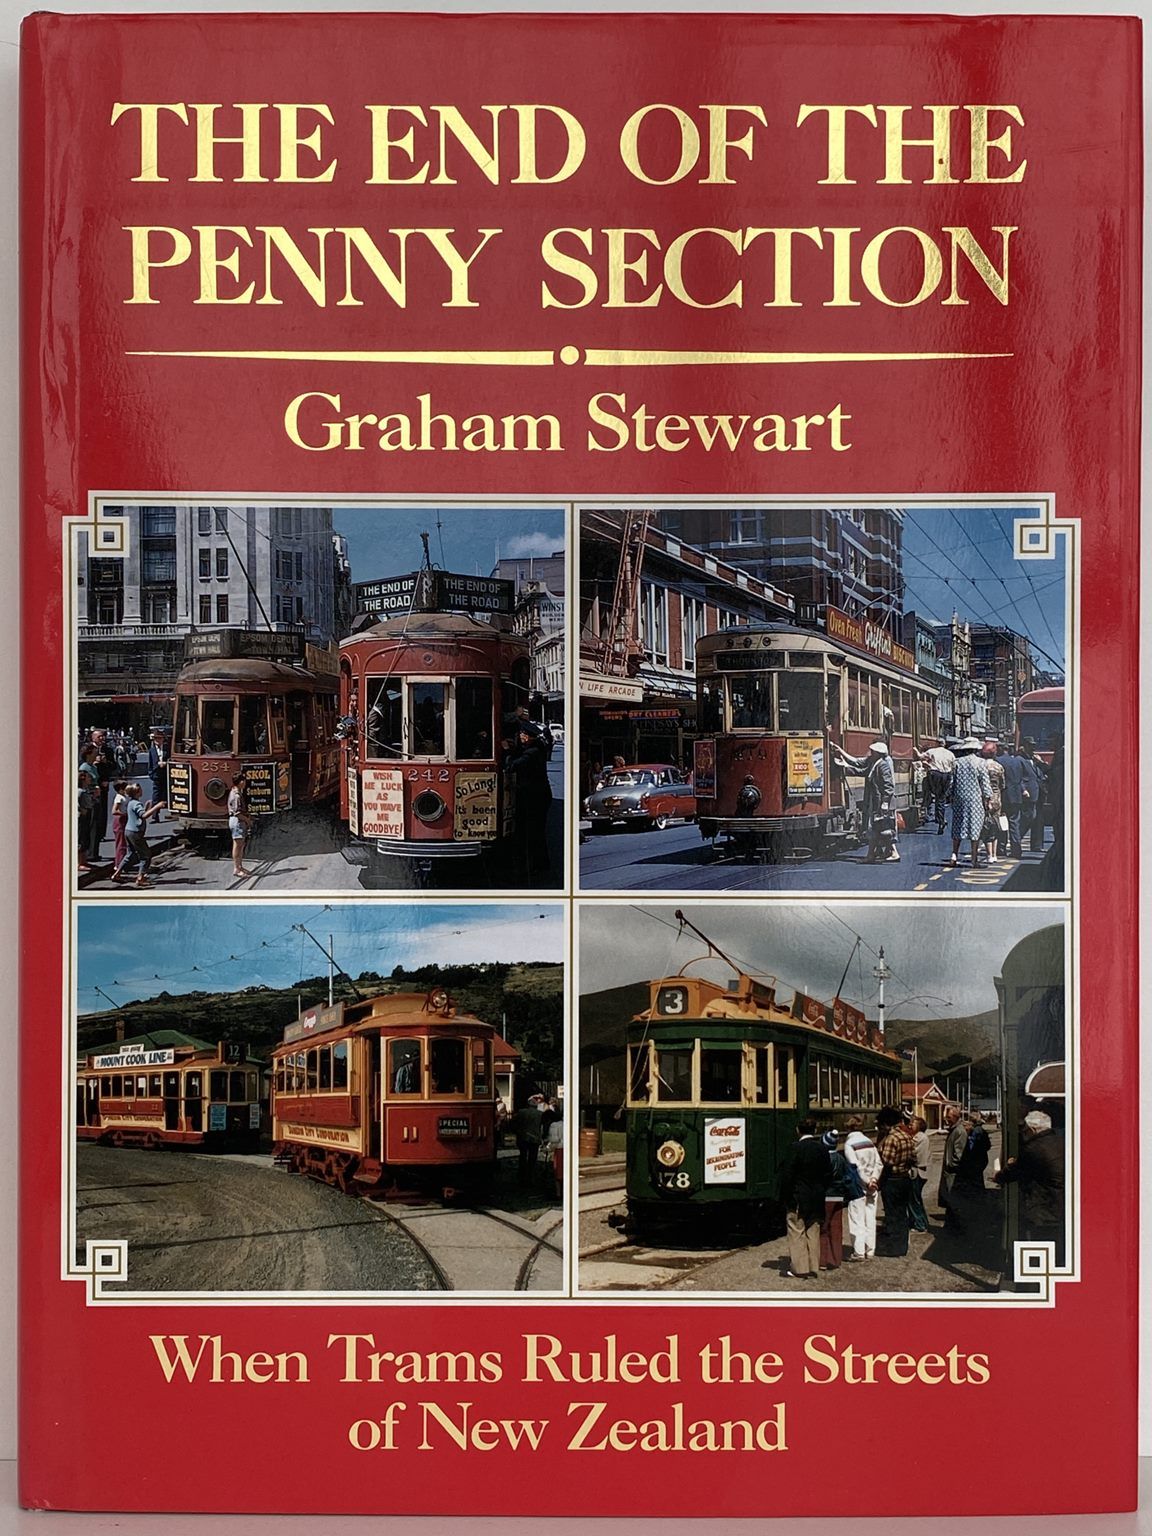 THE END OF THE PENNY SECTION: When Trams Ruled the Streets of New Zealand